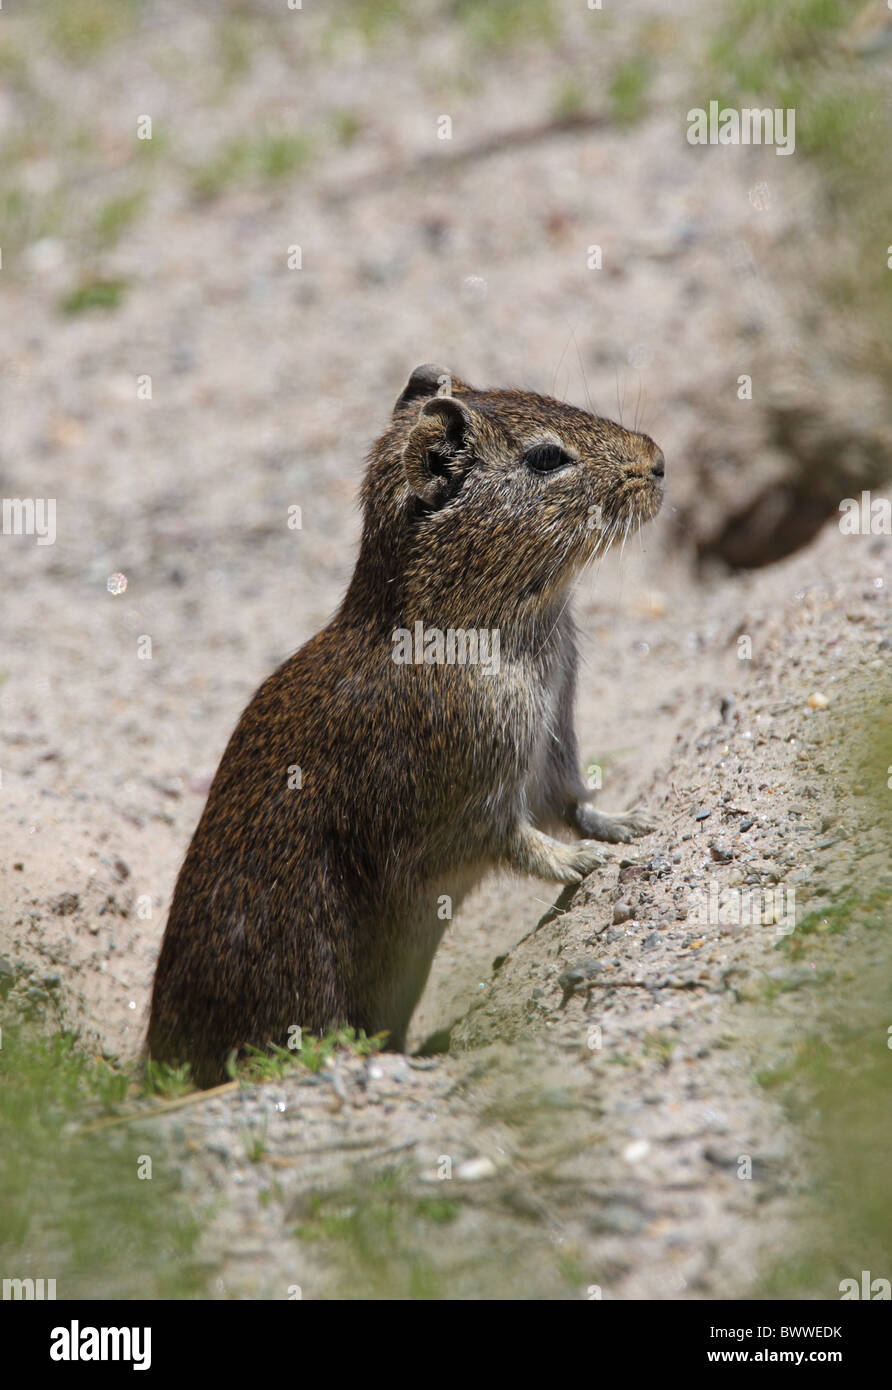 animal animals mammal mammals rodent rodents 'tuco-tuco' 'tuco-tucos' 'tuco tuco' 'tuco tucos' 'south america' 'south american' Stock Photo